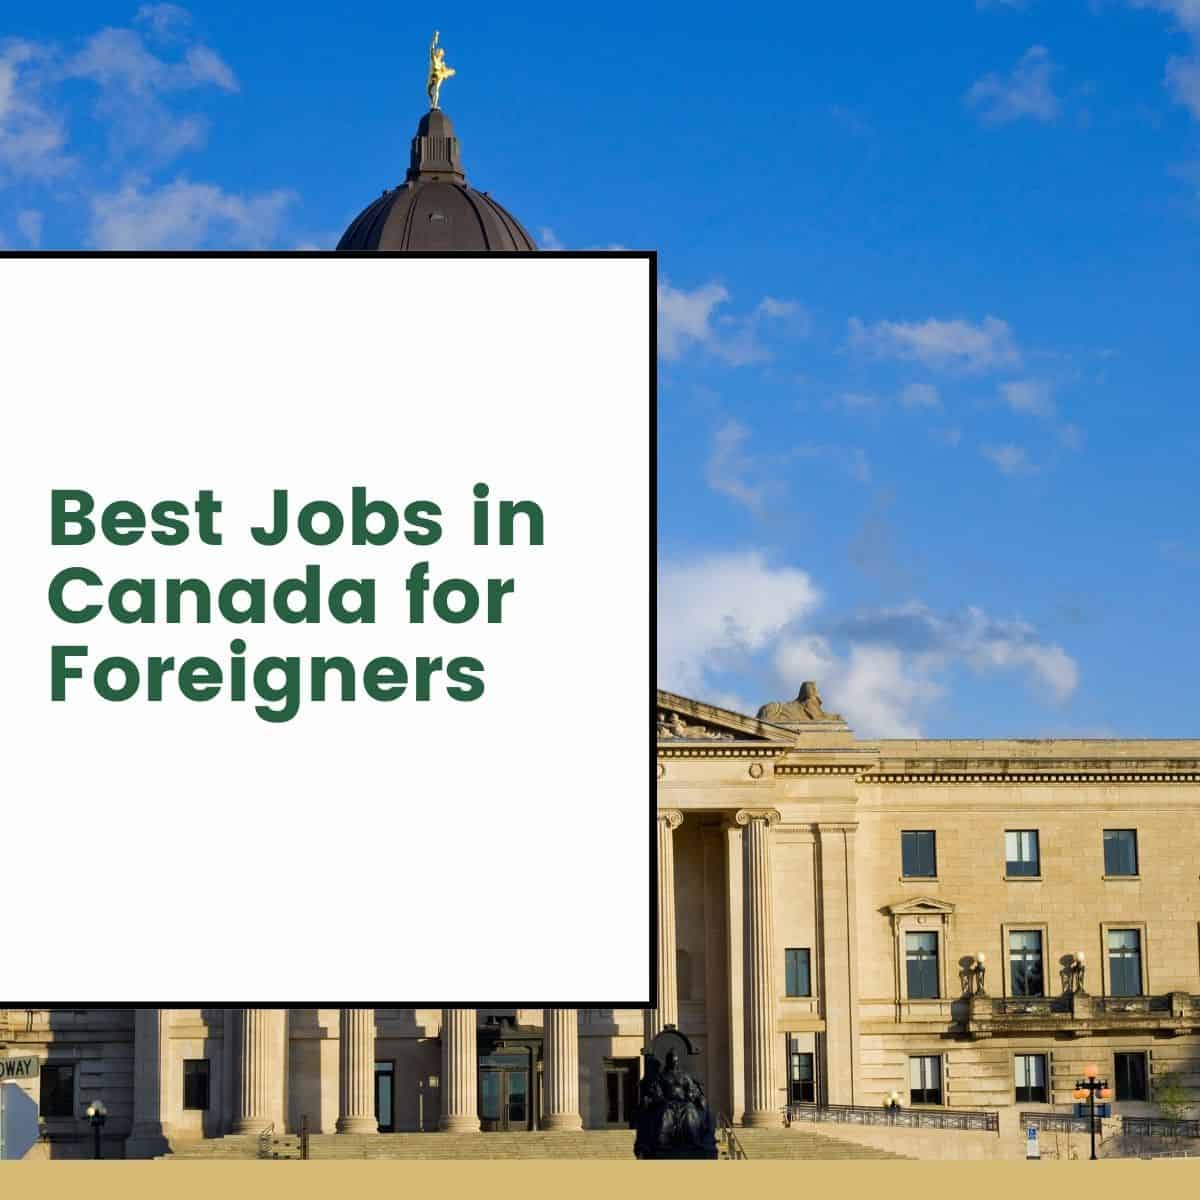 Are you trying to get a good job in Canada? You're fortunate, then! For foreigners, there are many fantastic work opportunities. Whether you're a nurse, doctor, engineer, or teacher, there's bound to be a position that's perfect for you. Keep reading to learn more about the best jobs in Canada for foreigners.
Which Job Is in Most Demand in Canada?

There are many great jobs in Canada for foreigners, but which one is in the most demand? According to recent statistics, the answer is:

Web Developers
Drivers
Veterinarians
Registered Nurses
Receptionists
Engineers
Opticians
Web Developers
Web Developers are in high demand in Canada due to the ever-growing need for businesses to have an online presence. You'll have no trouble finding work in Canada if you're a web developer.
Drivers
Drivers are continuously required in areas like Toronto and Vancouver due to the large influx of residents there. You will no doubt have any trouble finding work whether you drive a cab, an Uber, or a bus.
Veterinarians
In Canada, many households have pets, so there is always a demand for veterinarians. If you're passionate about animals and have the necessary qualifications, this could be the perfect job for you.
Registered Nurses
The demand for registered nurses is increasing along with Canada's population. If you're a nurse, you'll be able to find work in hospitals, clinics, and long-term care facilities.
Receptionists
Because there are so many businesses functioning in Canada, receptionists are in high demand. If you have previous experience working as a receptionist, finding employment won't be a problem.
Engineers
Engineers are in high demand due to the growing number of construction projects in Canada. If you're an engineer, there are many different projects that you can work on.
Opticians
Due to the aging population, there is a growing need for opticians in Canada. If you're an optician, you'll be able to find work in hospitals, clinics, and optical stores.
How to Get a Job in Canada for Freshers?

If you're a fresher, don't worry! There are plenty of great jobs in Canada for freshers as well. Here are some tips to help you get started:

Start by searching the internet. Many job websites list positions that are open to foreigners.

Next, send your resume to Canadian businesses that you're interested in working for. Foreign employees are welcome at many companies.

Finally, think about requesting a work visa. You'll be able to work lawfully in Canada thanks to this.

You may be confident that if you take these actions, you'll land a fantastic job in Canada.
How to Find a Job in Canada on Visit Visa?
While it can certainly be possible to find a job in Canada while on a visitor visa, it is important to note that you will need additional documents and visas in order to work legally. Depending on your country of origin, you may need an Electronic Travel Authorization (eTA) or a work permit before being able to start the job.

It is also worth noting that some industries have restrictions for work permits and may require a Labour Market Impact Assessment before hiring foreign workers. However, if you are able to secure a job offer during your visit, this can provide the necessary steps for you to continue the process and potentially move toward obtaining permanent residency in Canada. Keep an open mind and network with potential employers, but make sure to do your research and understand the requirements for working in Canada before starting the job search during your visit.
How Easy Is It to Get a Job in Canada?

Getting a job in Canada is relatively easy, especially if you have the necessary skills and qualifications. Many websites post available employment, and many companies are willing to hire international workers. However, it is important to note that you will need additional documents and visas in order to work legally.

It is also worth noting that some industries have restrictions for work permits and may require a Labour Market Impact Assessment before hiring foreign workers. However, if you are able to secure a job offer, this can provide the necessary steps for you to continue the process and potentially move toward obtaining permanent residency in Canada.
Conclusion
There are many great jobs in Canada for foreigners. With a little bit of effort, you're sure to find the perfect job for you. Remember to research the visa requirements for your country of origin and make sure you have all the necessary documents before beginning your job search.
